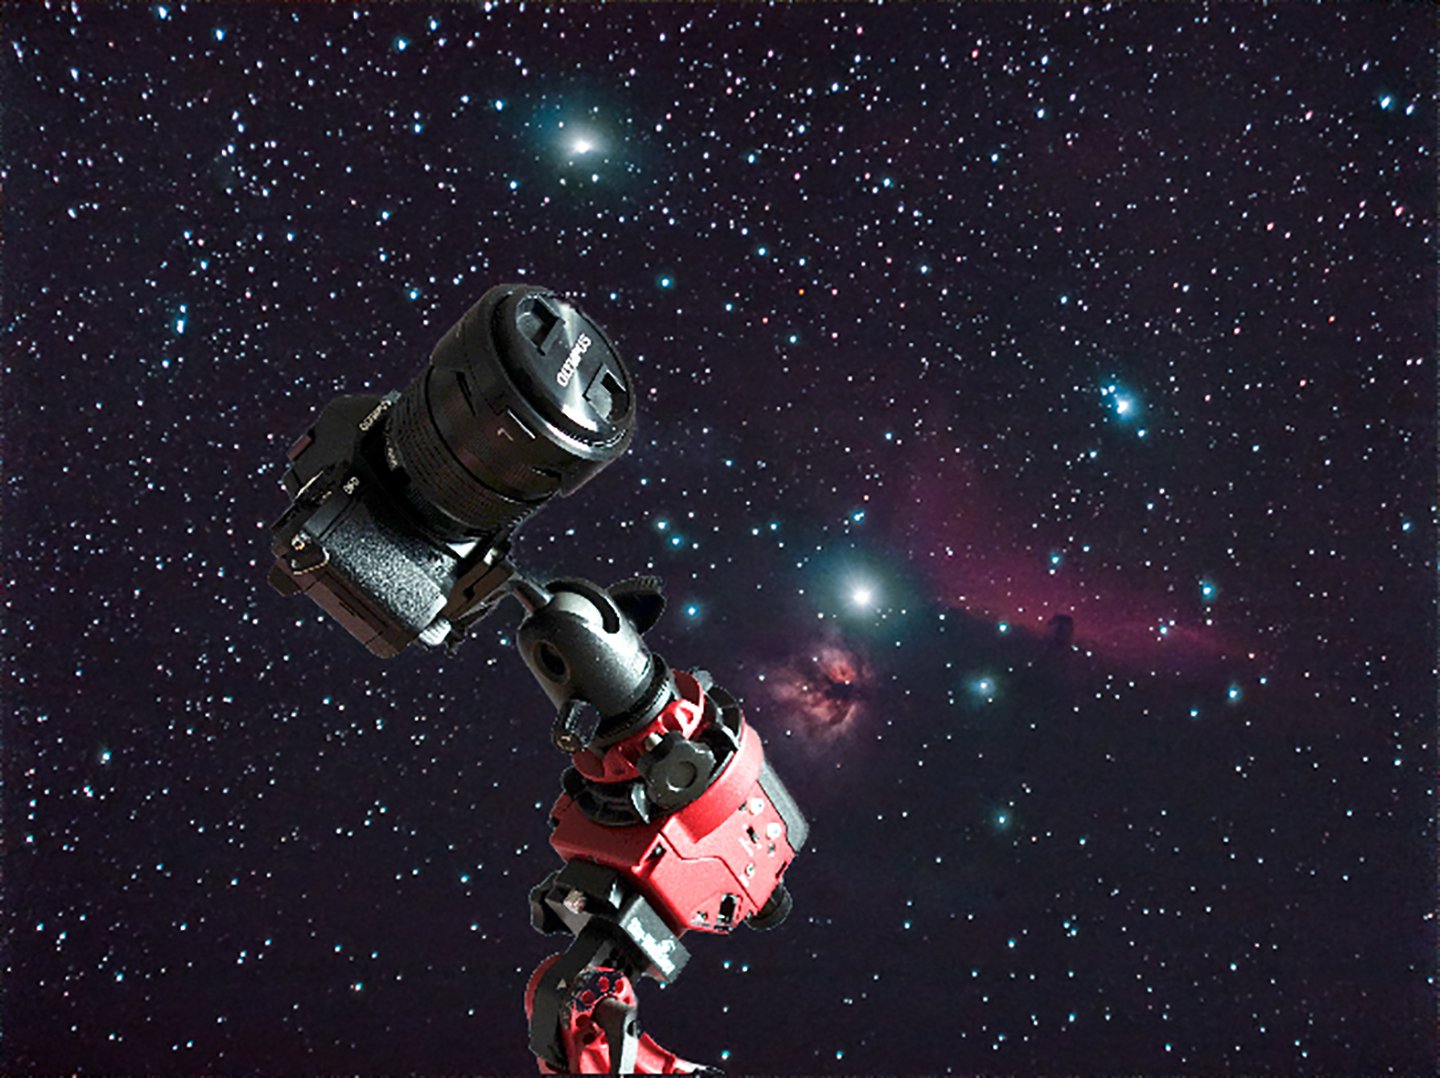 The Skywatcher Star Adventurer equatorial tracking mount for astrophotography